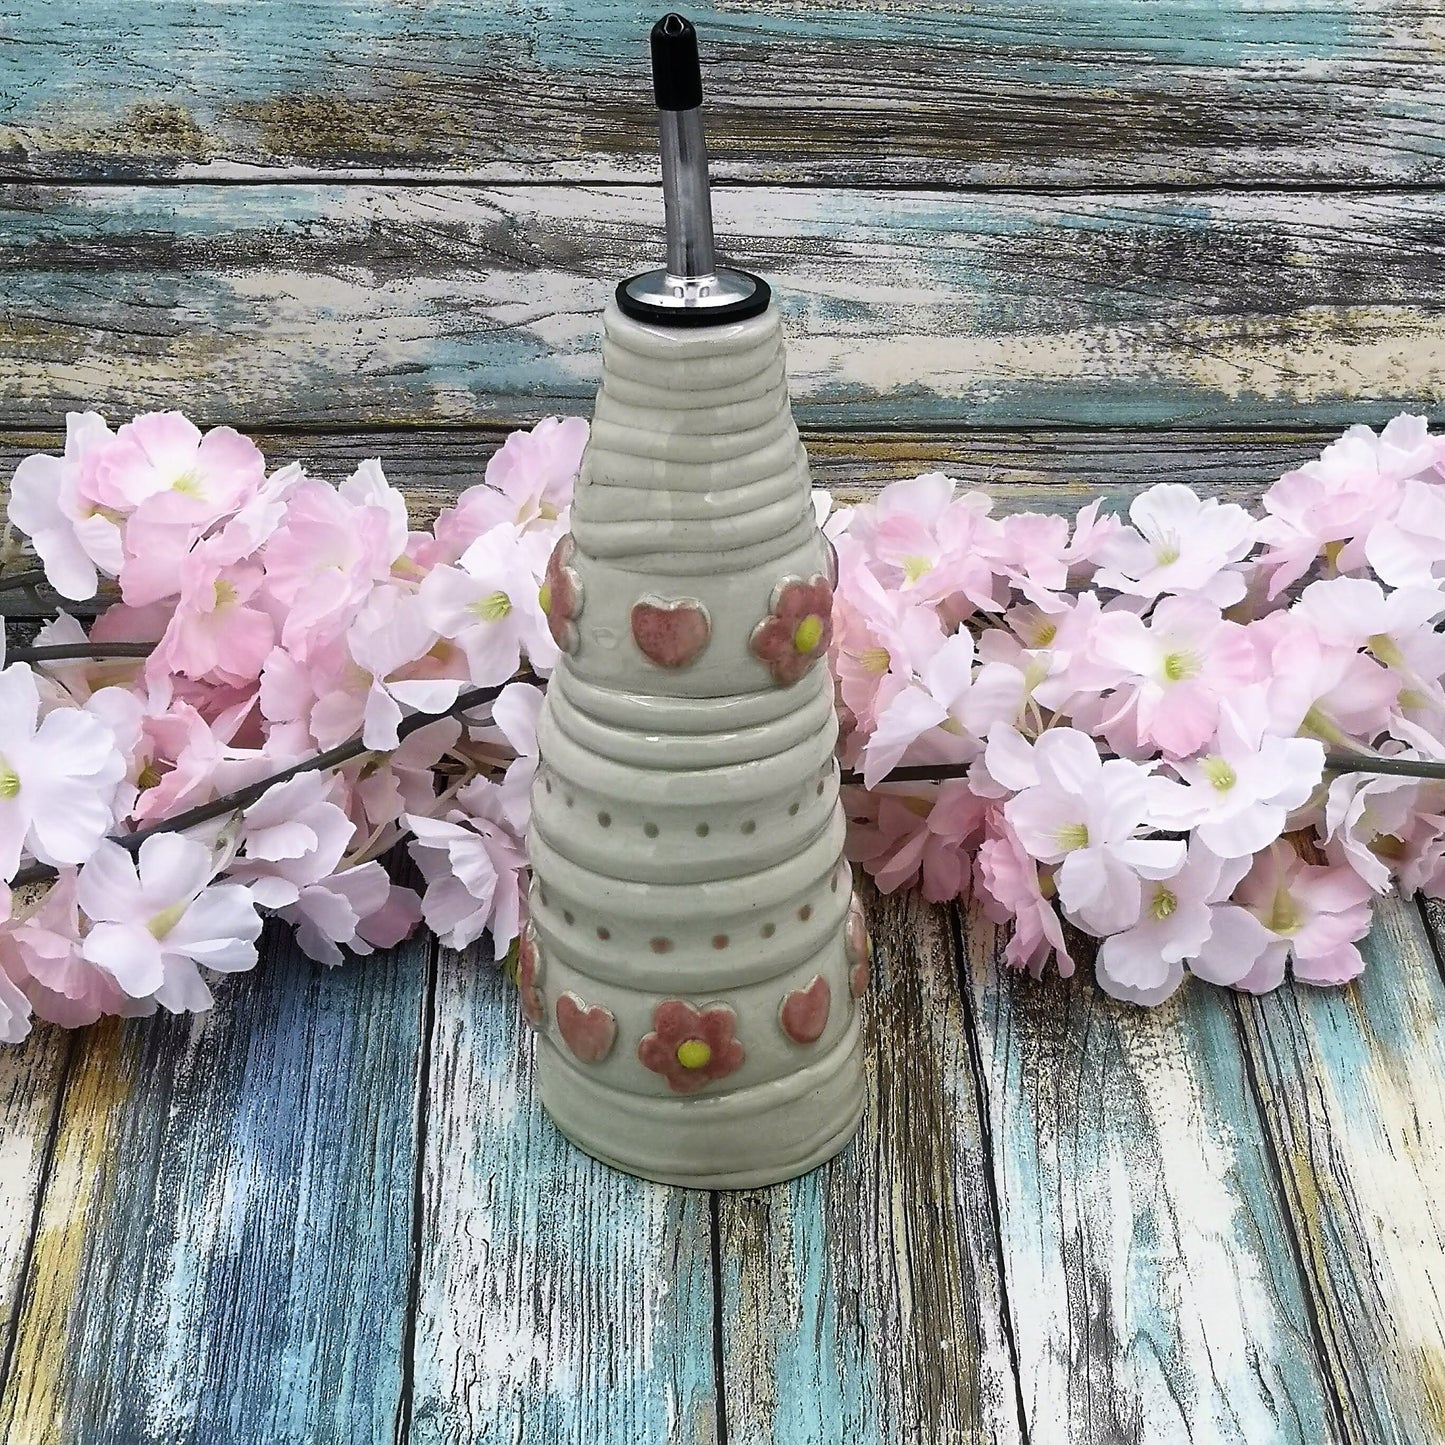 OLIVE OIL DISPENSER, Cooking Gift, Stoneware Olive Oil Cruet, Handmade Pottery Decorative Bottles, Mothers Day Gift From Daughter - Ceramica Ana Rafael